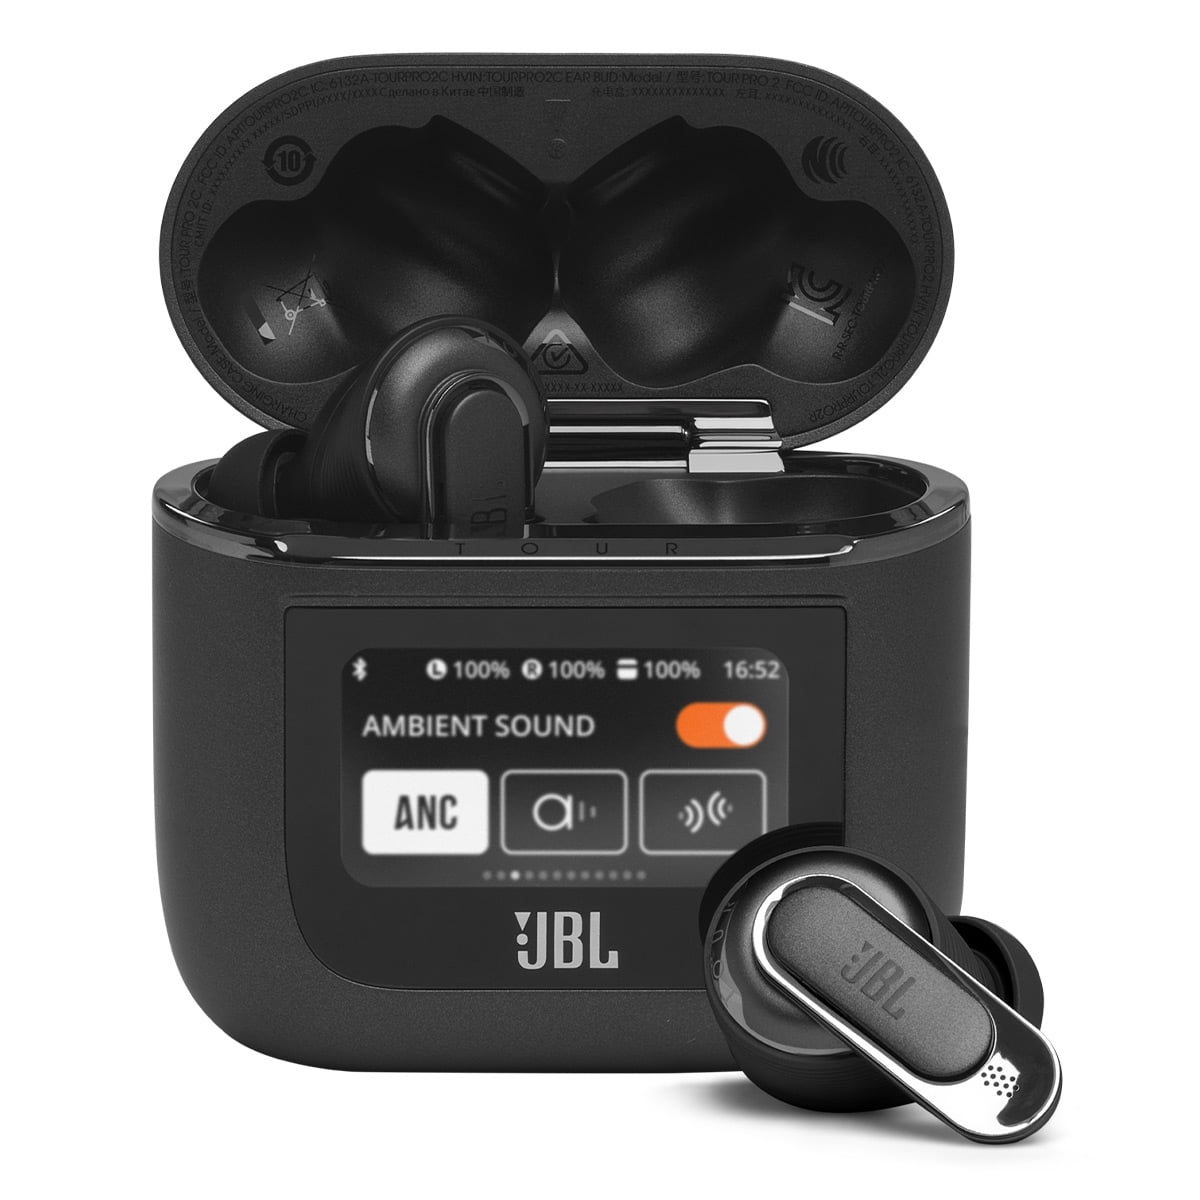 True 2 Tour Pro Wireless (Black) Noise Cancelling Smart with Case Earbuds JBL